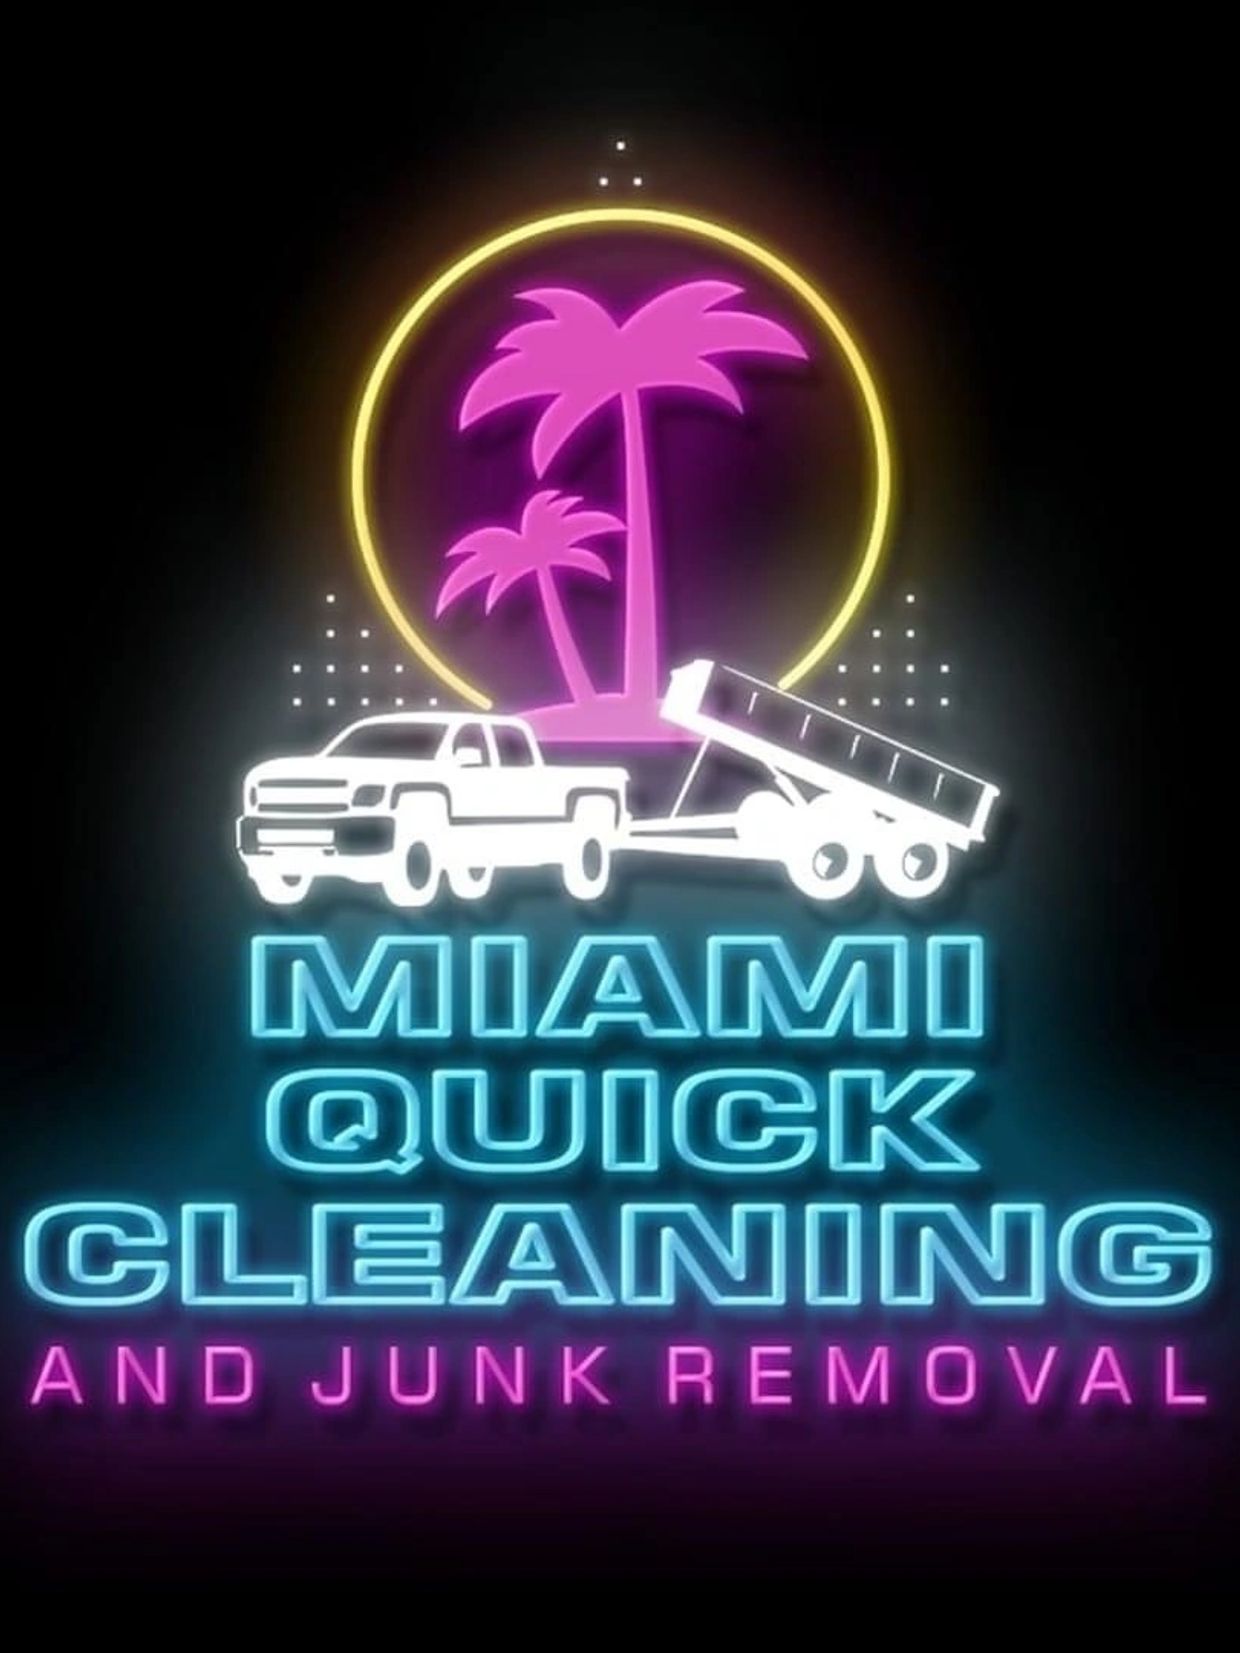 Junk removal hot tub removal appliances removal mattress removal construction clean up 